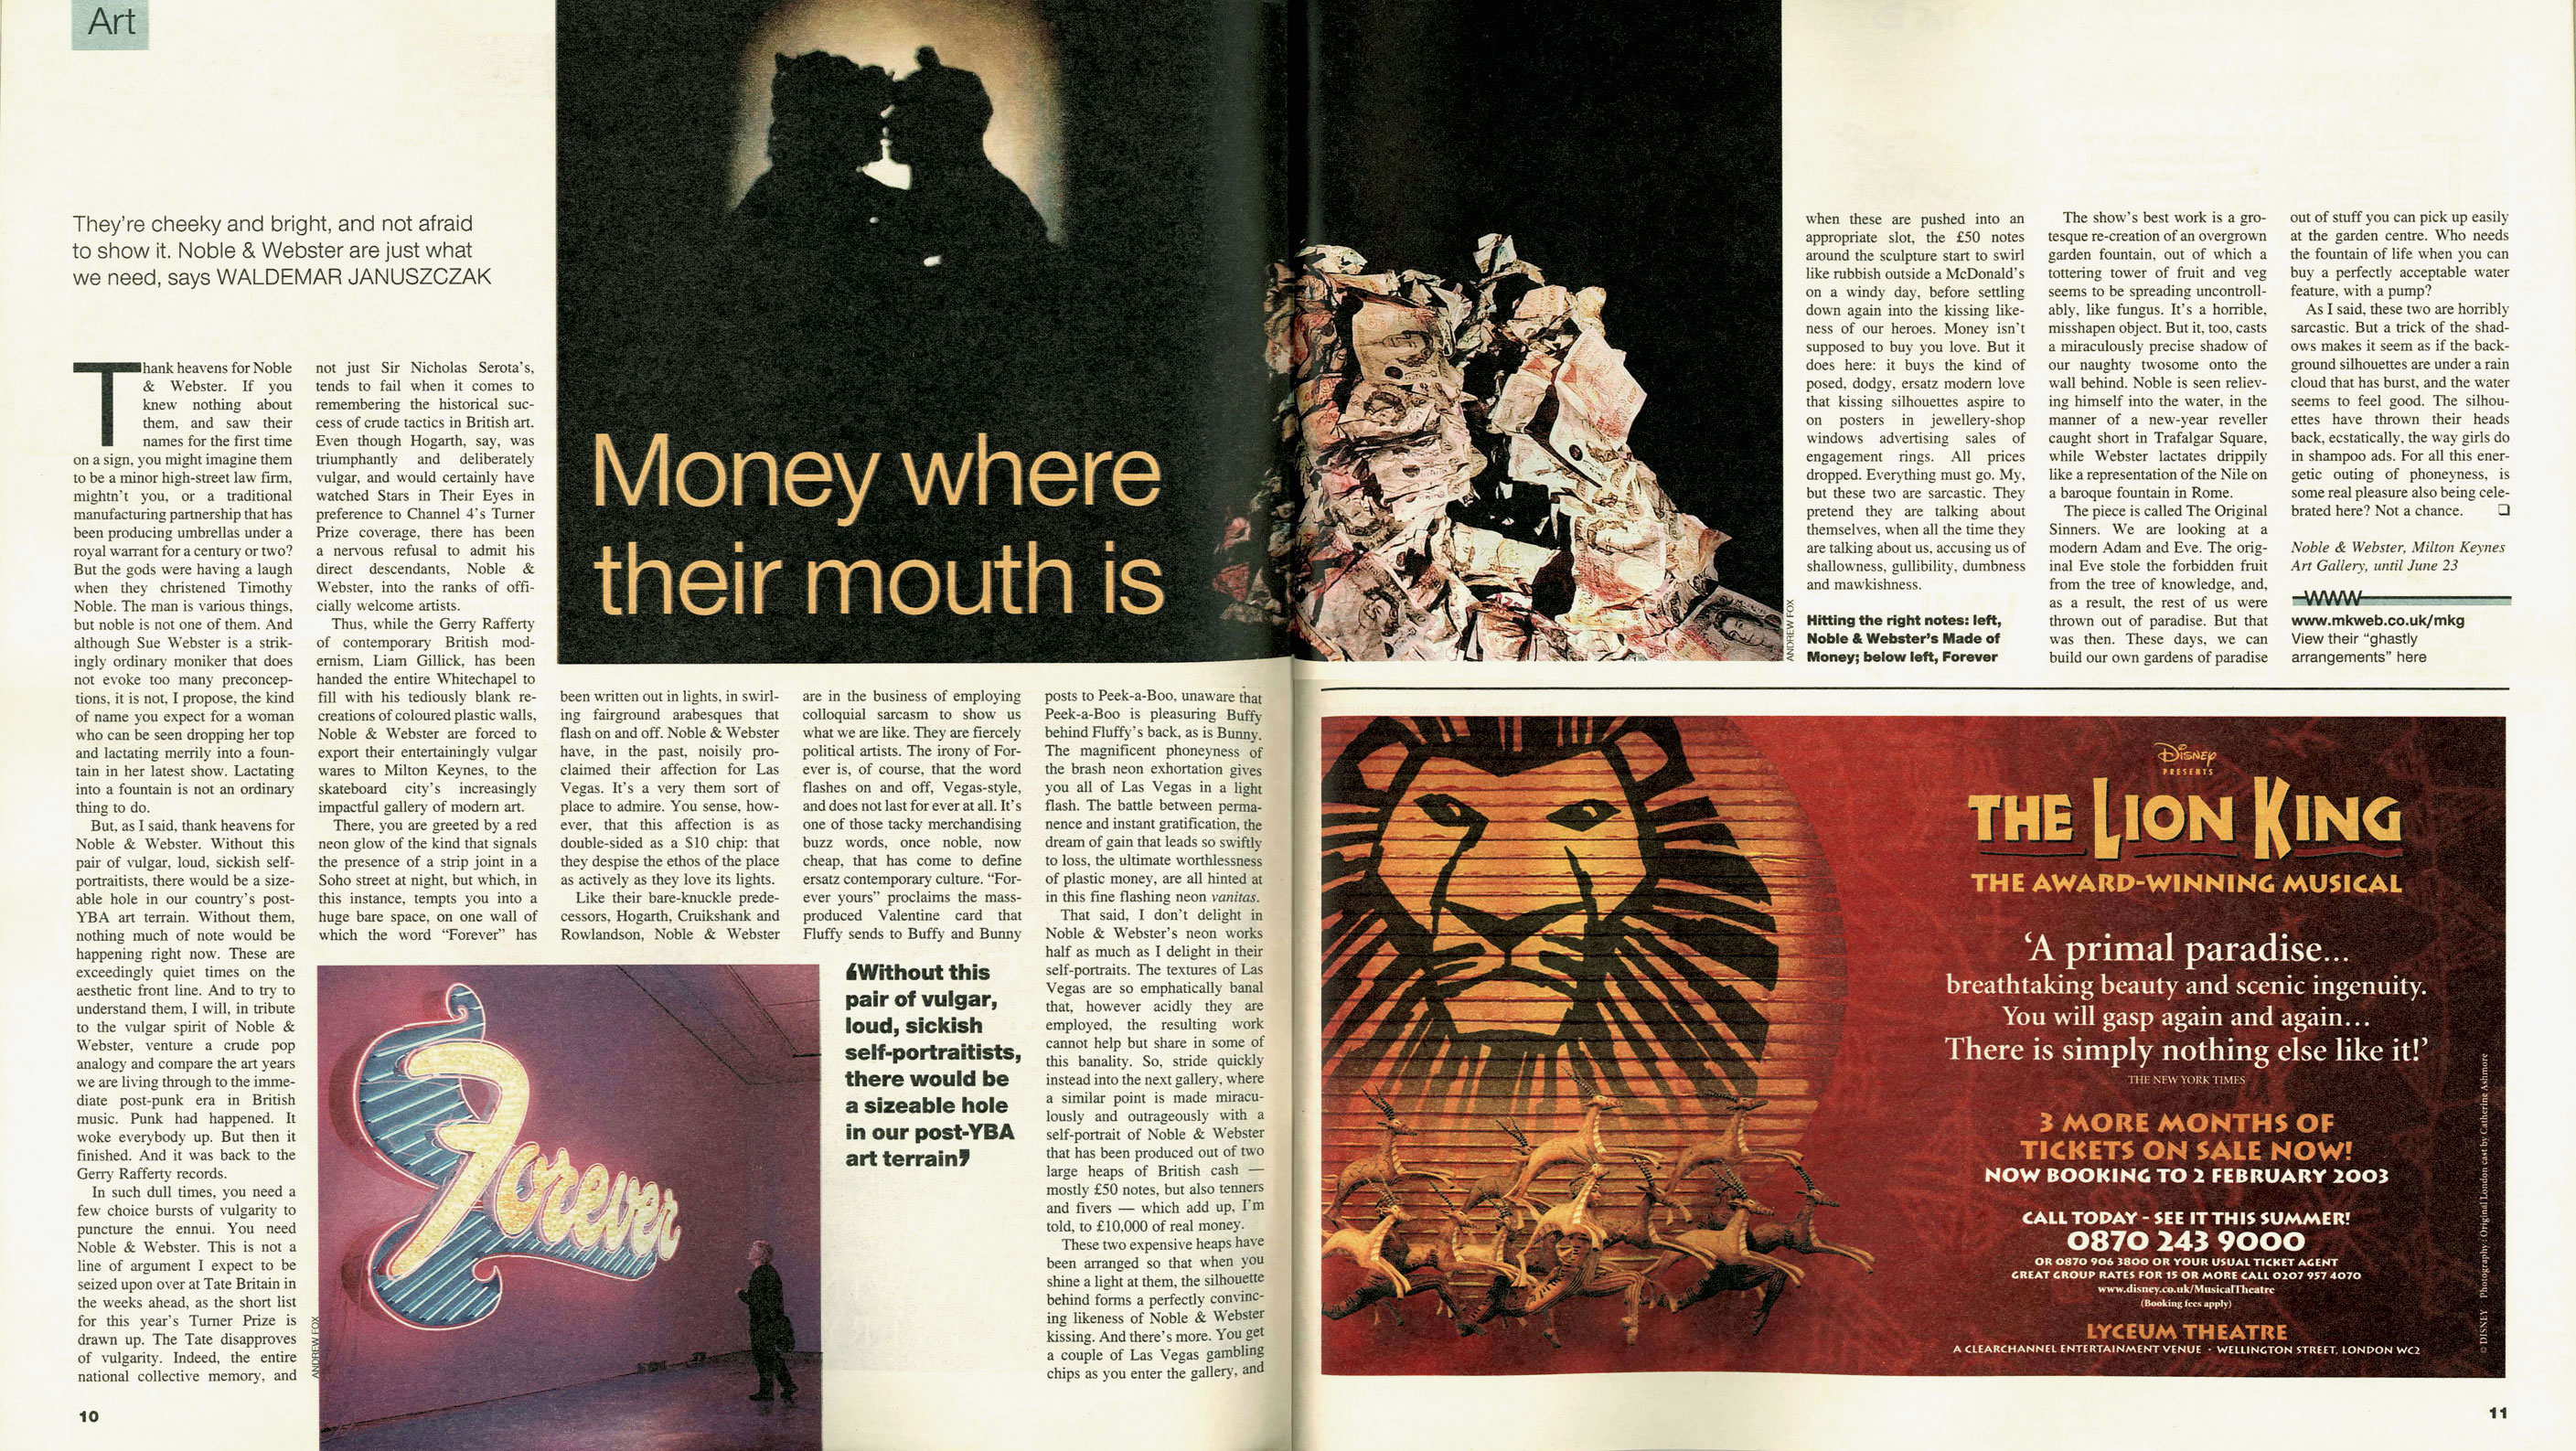 Sunday Times Culture May 2002 pgs10-11